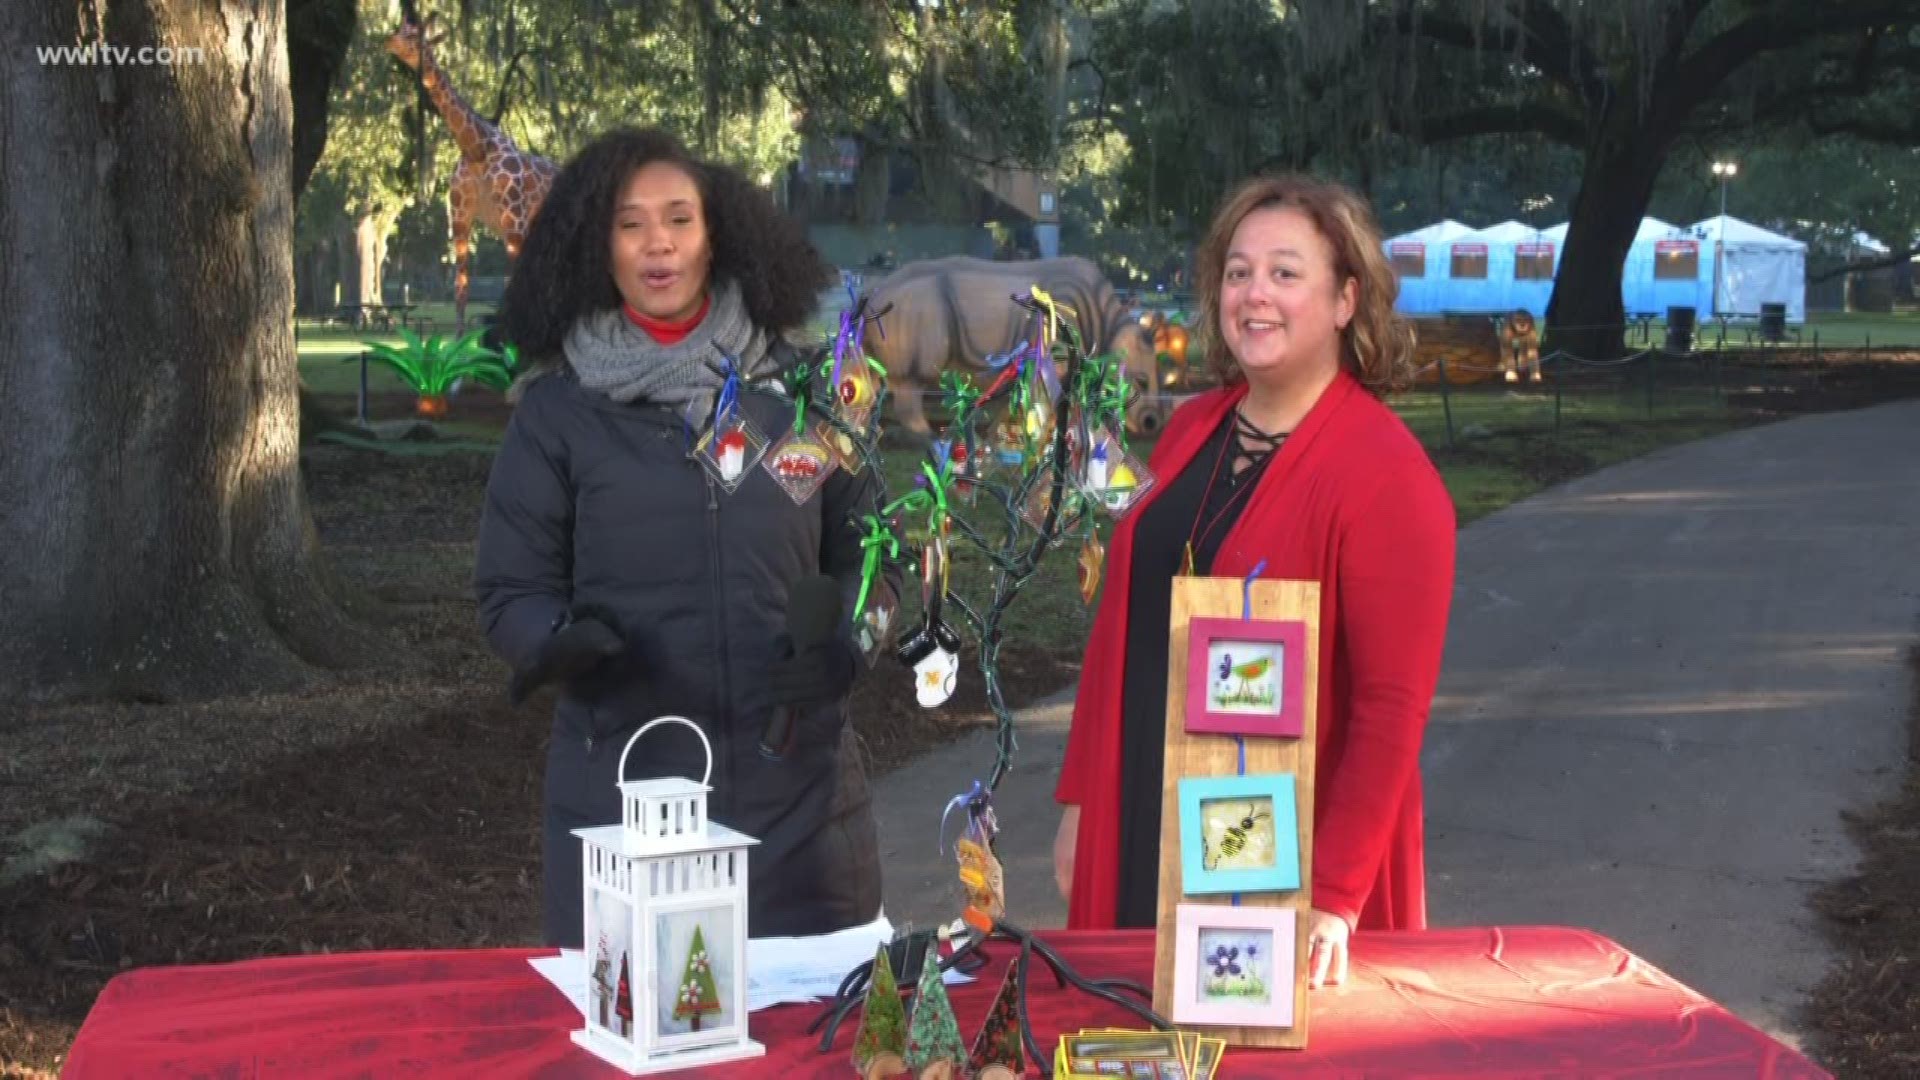 Craft vendors including Lizano's Glass Haus will be selling items at Audubon Zoo Lights, beginning Nov. 23.